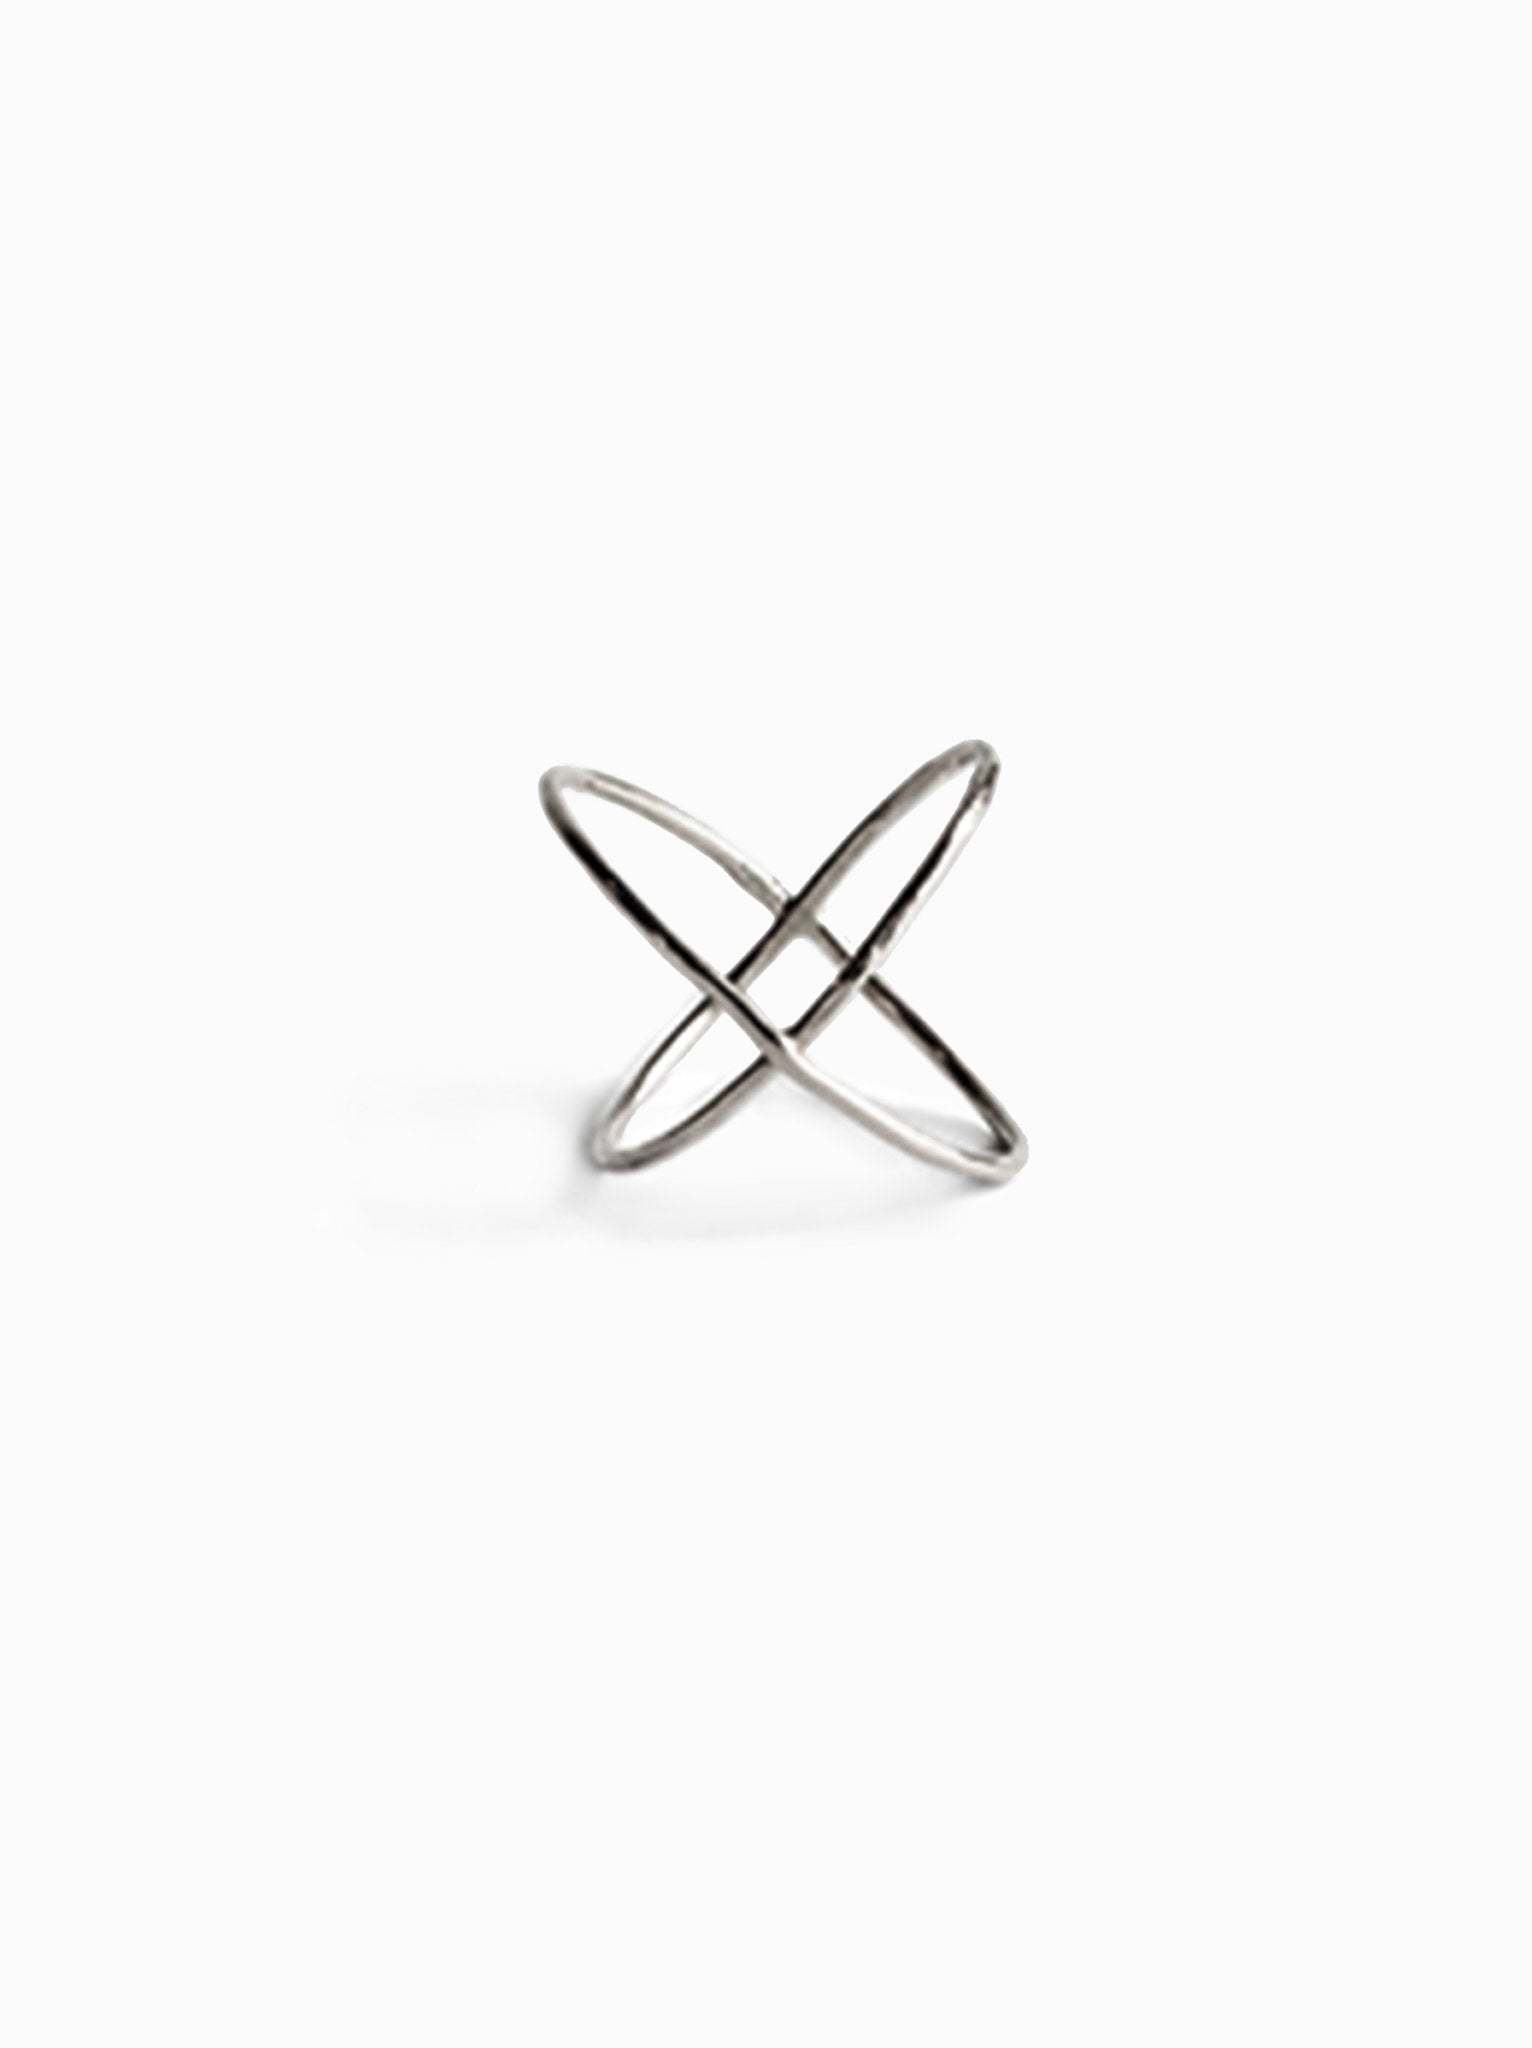 Rhombus Ring in Sterling Silver and CZ Stones – Meraki Lifestyle Store